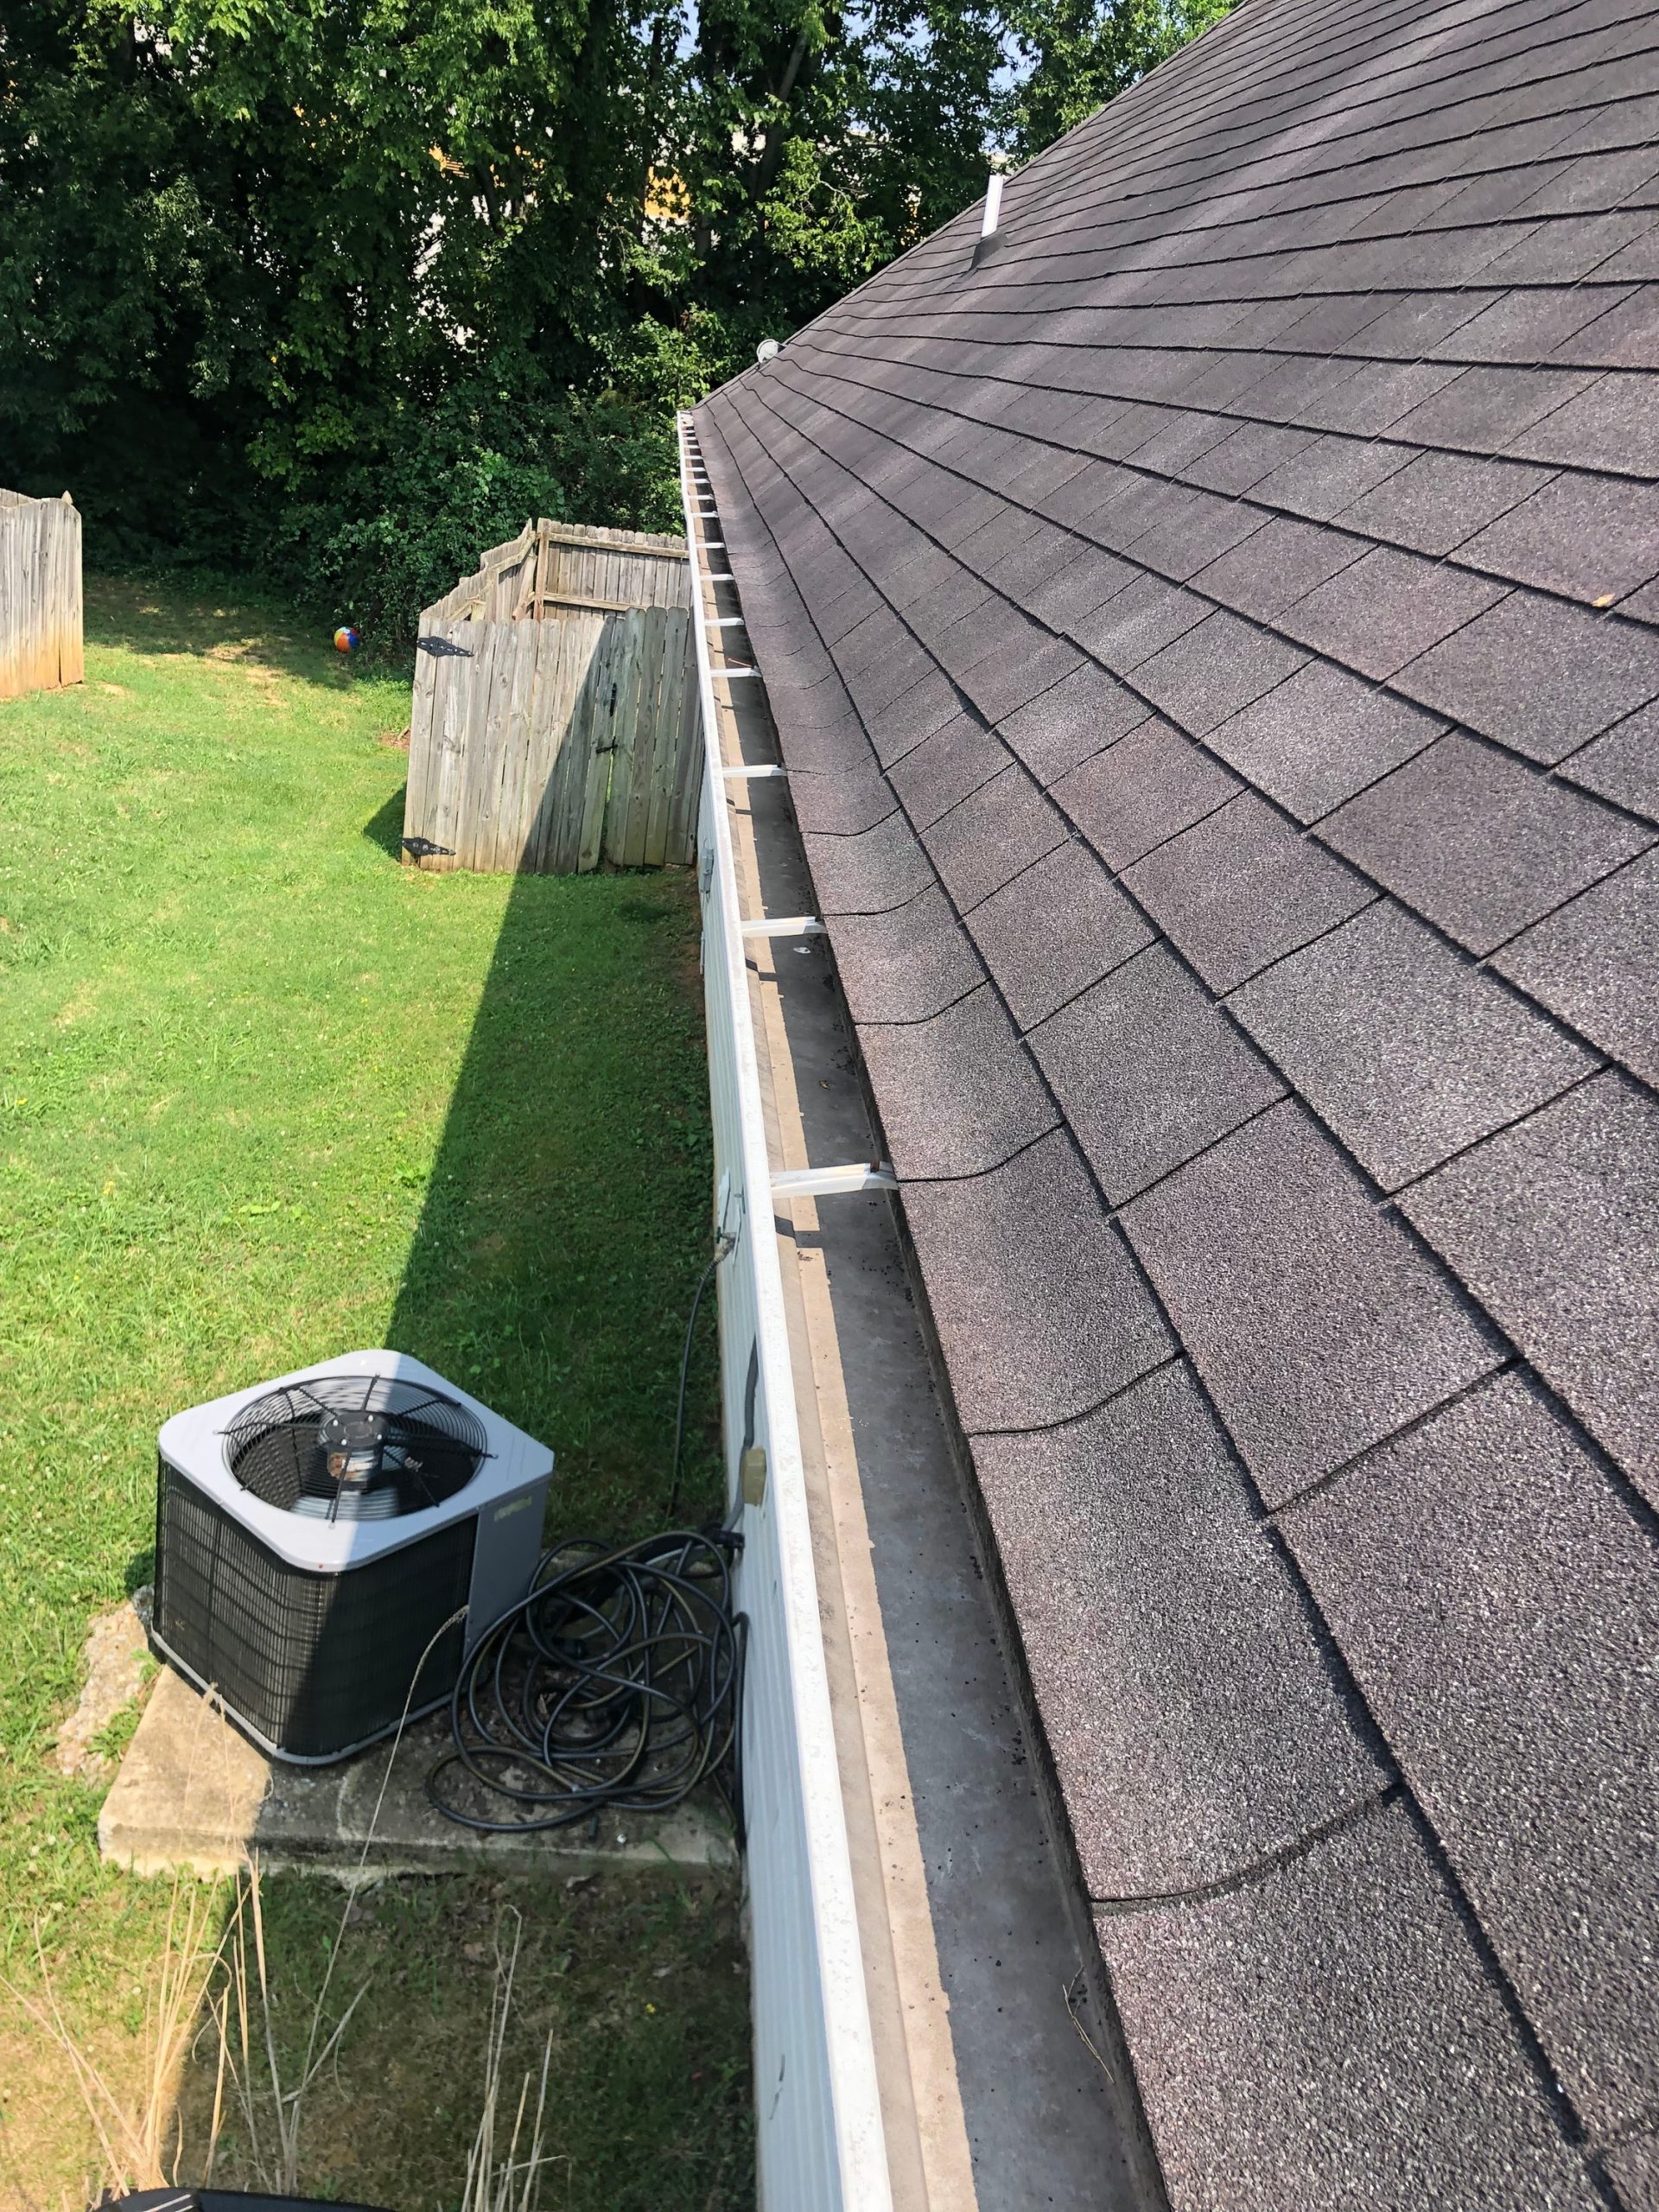 Gutter Cleaning Service in Austin for Robert's home